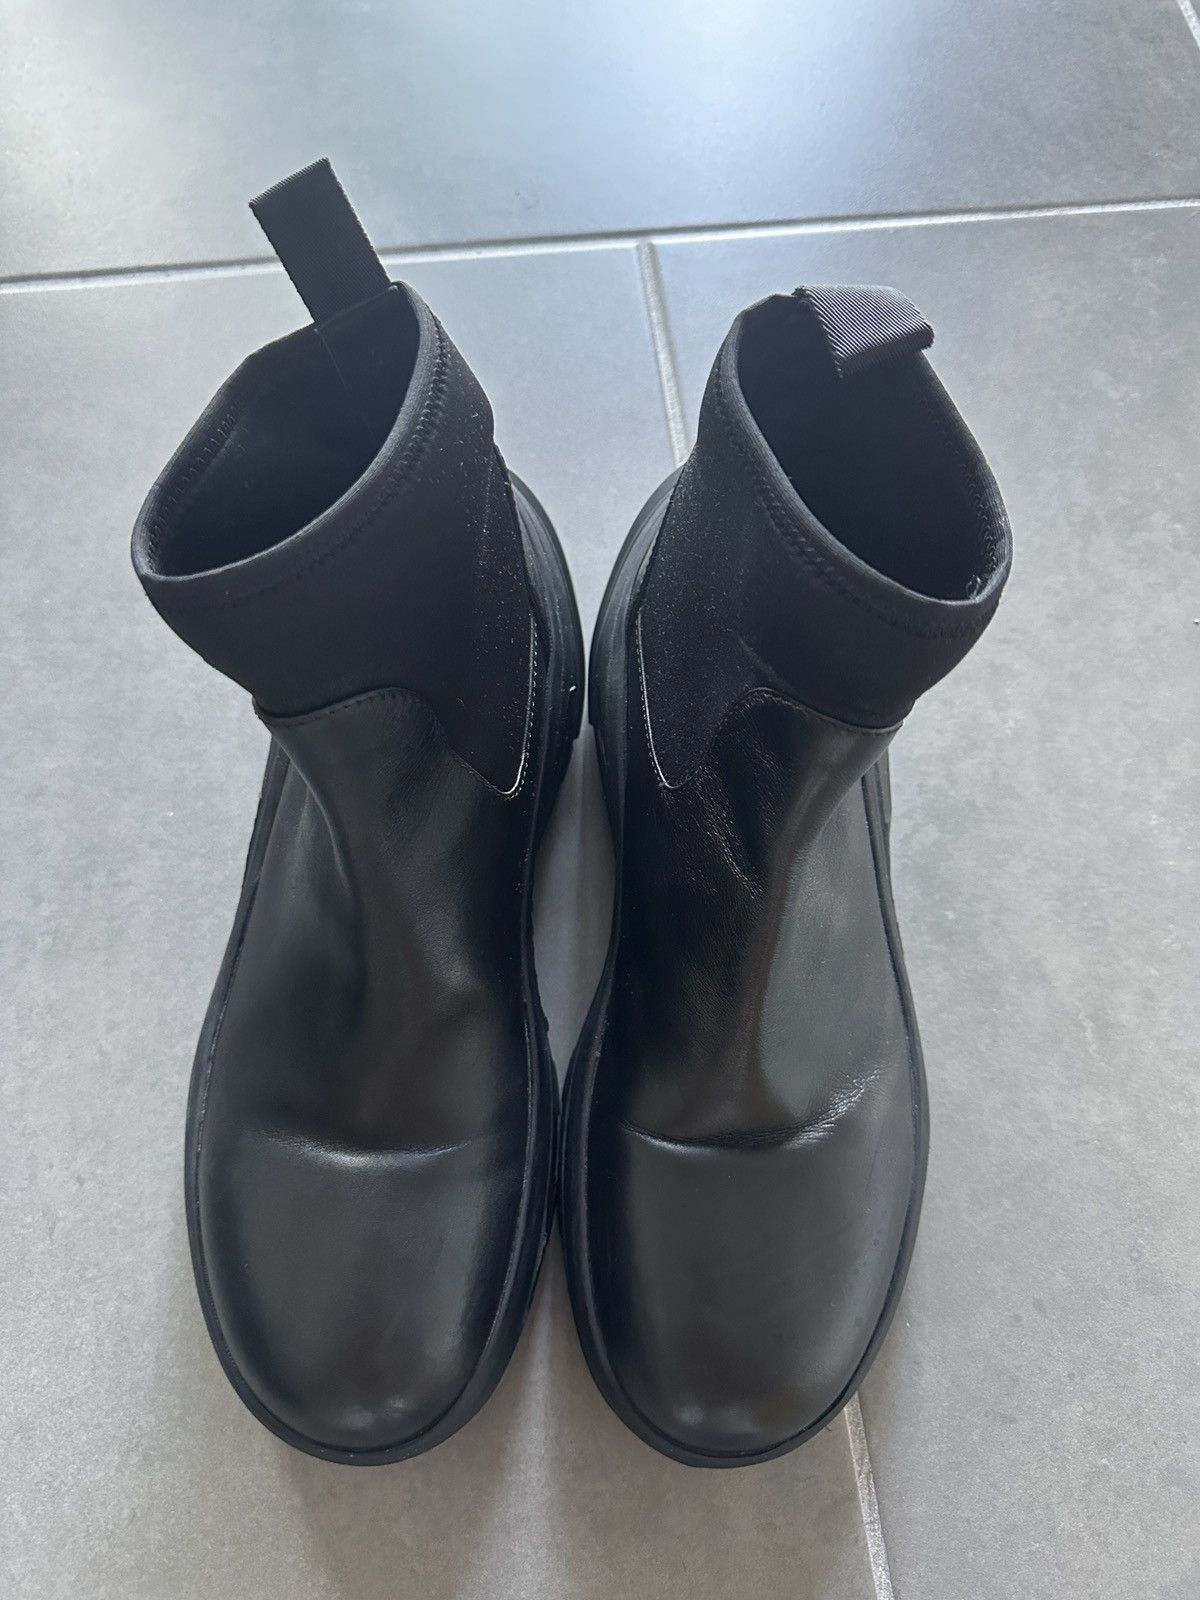 1017 ALYX 9SM Alyx Chelsea Boots | Grailed